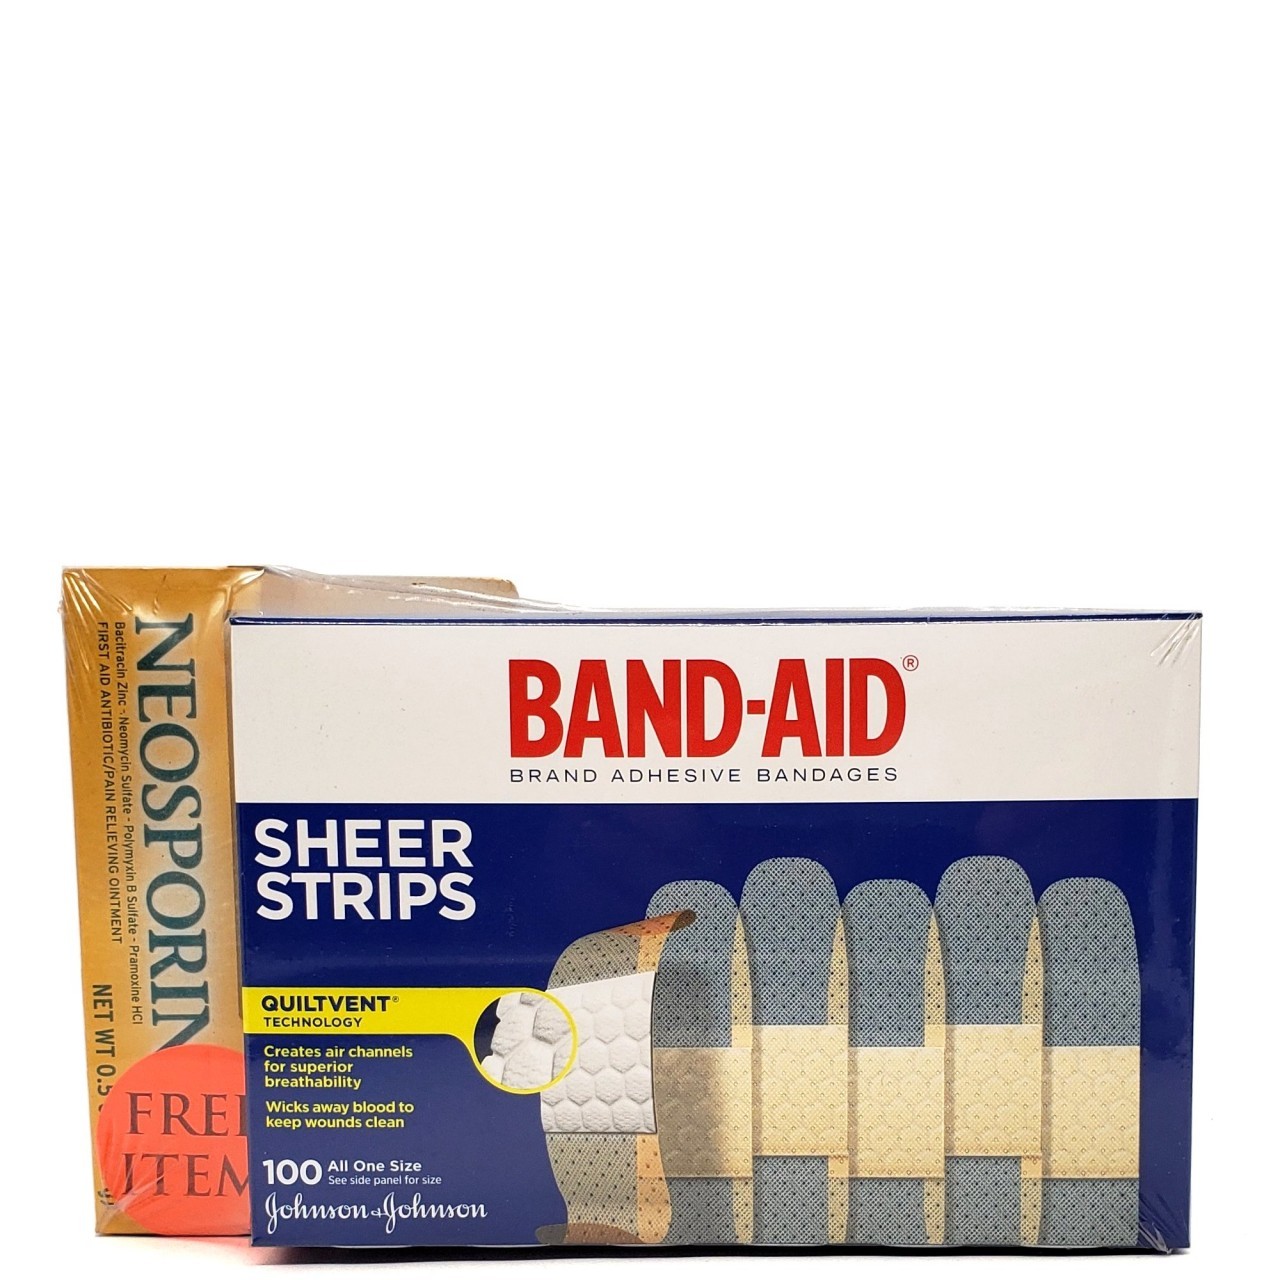 BAND-AID SHEER 3/4in 100s